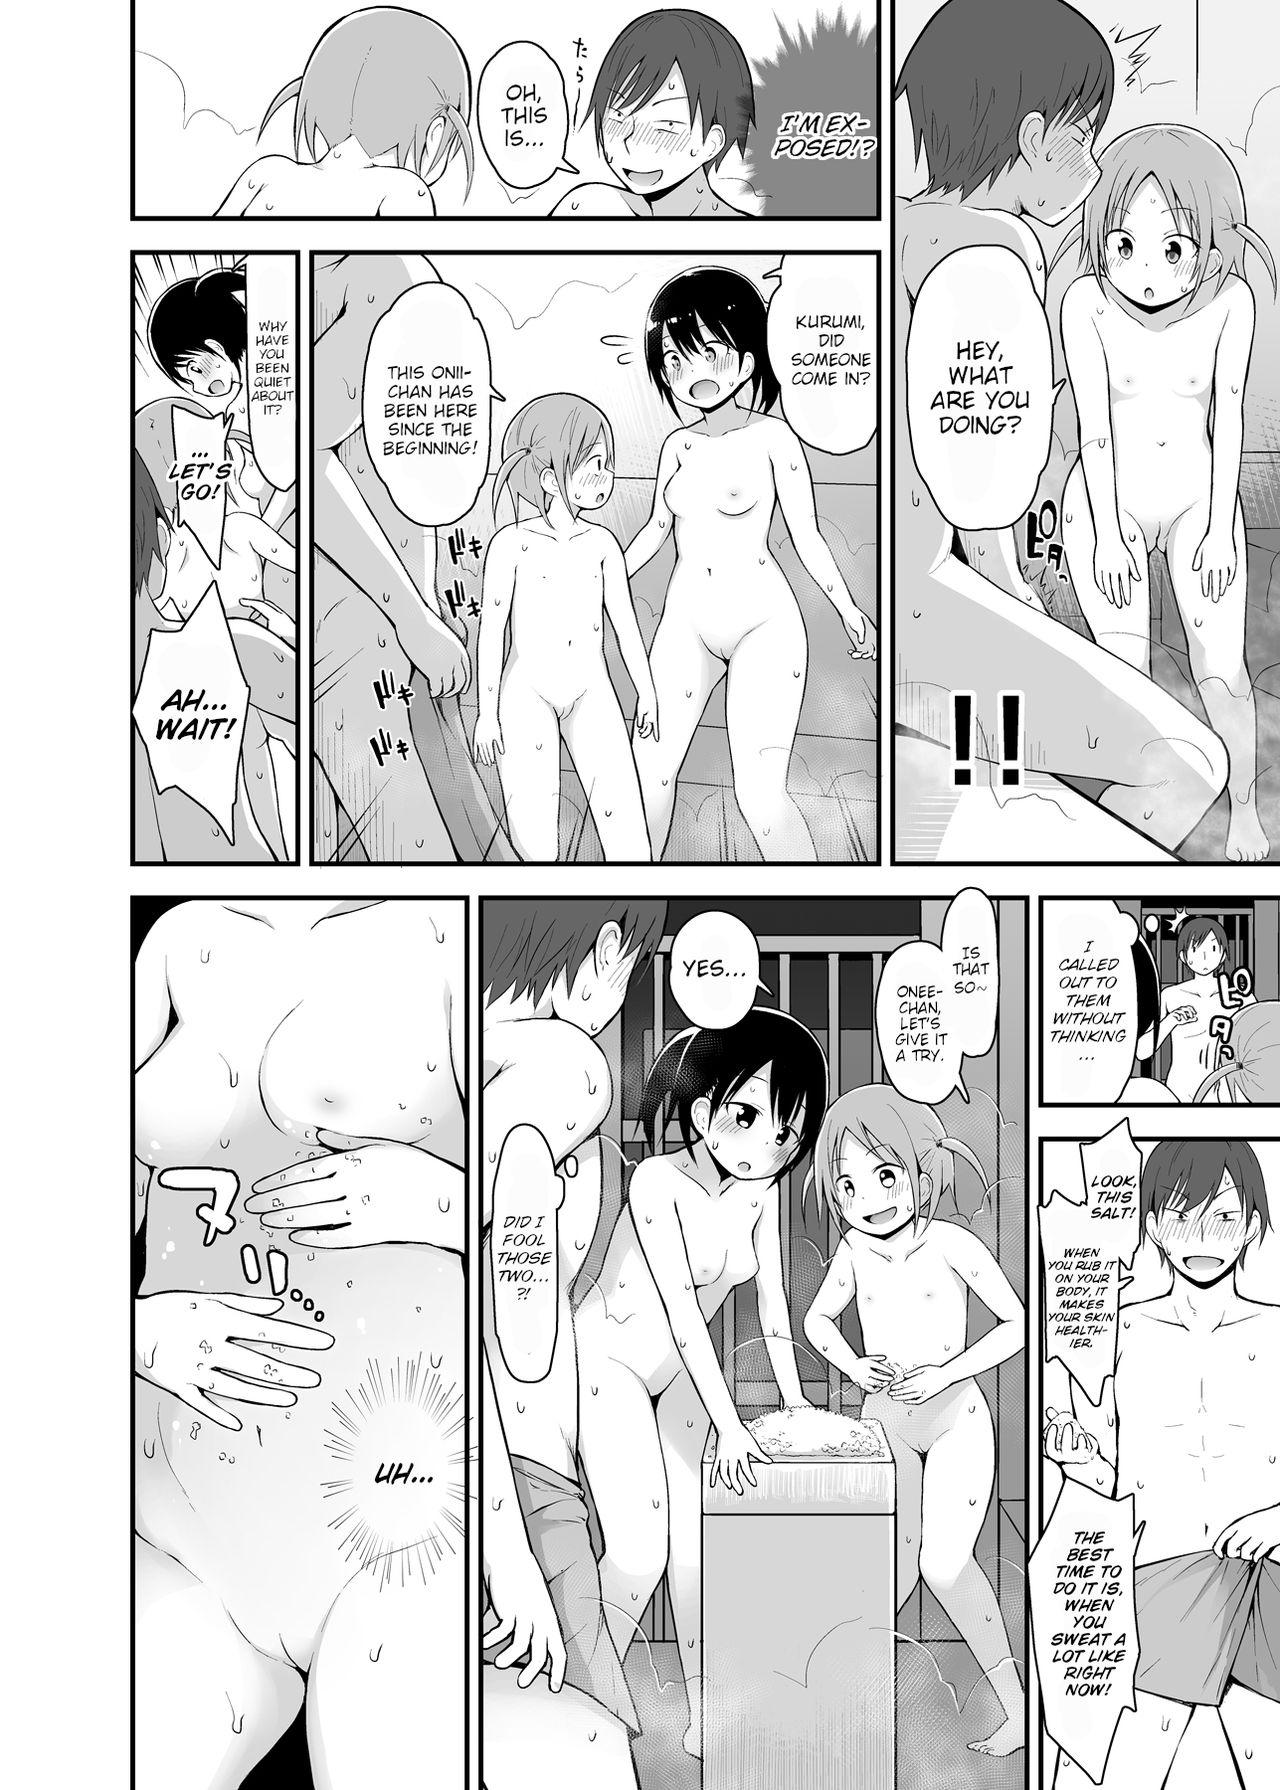 Onnanoko datte Otokoyu ni Hairitai 3 | They may just be little girls, but they still want to enter the men's bath! 3 6